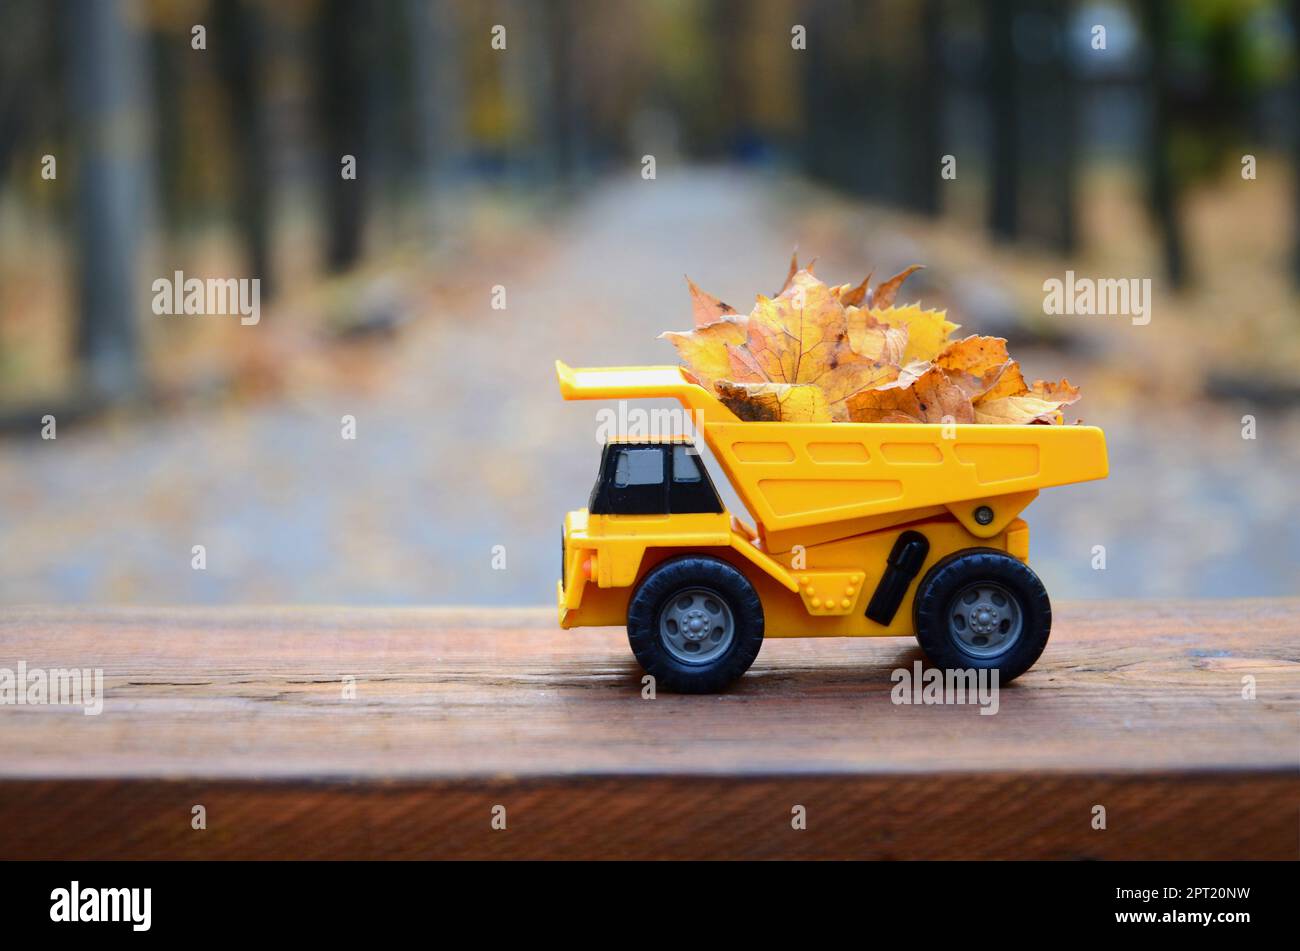 The concept of seasonal harvesting of autumn fallen leaves is depicted in the form of a toy yellow truck loaded with leaves against the background of Stock Photo